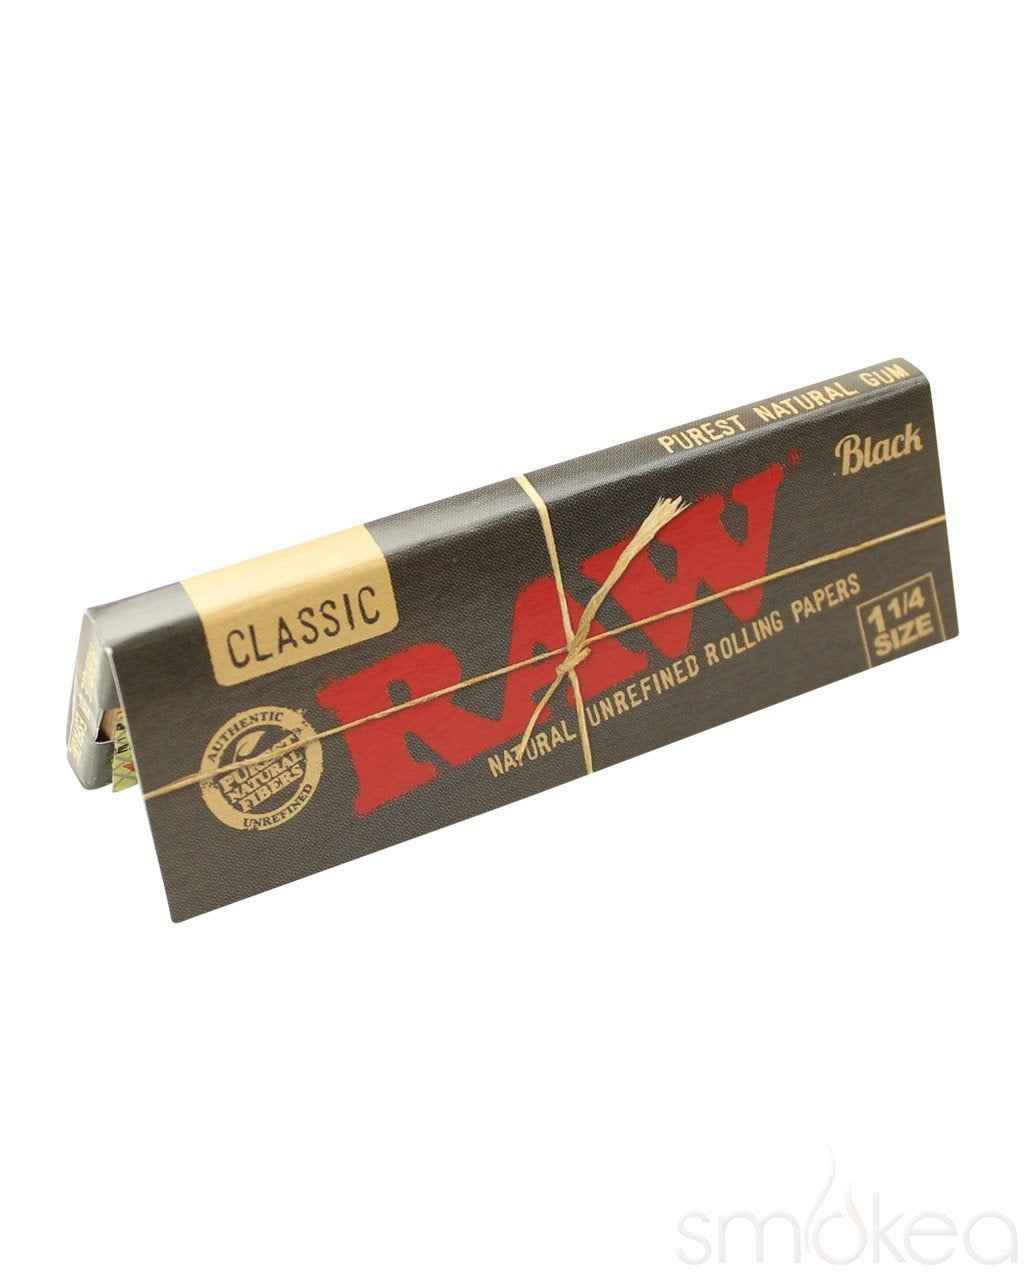 Raw Black Classic 1 1/4 Rolling Papers (Full Box) - Bittchaser Smoke Shop